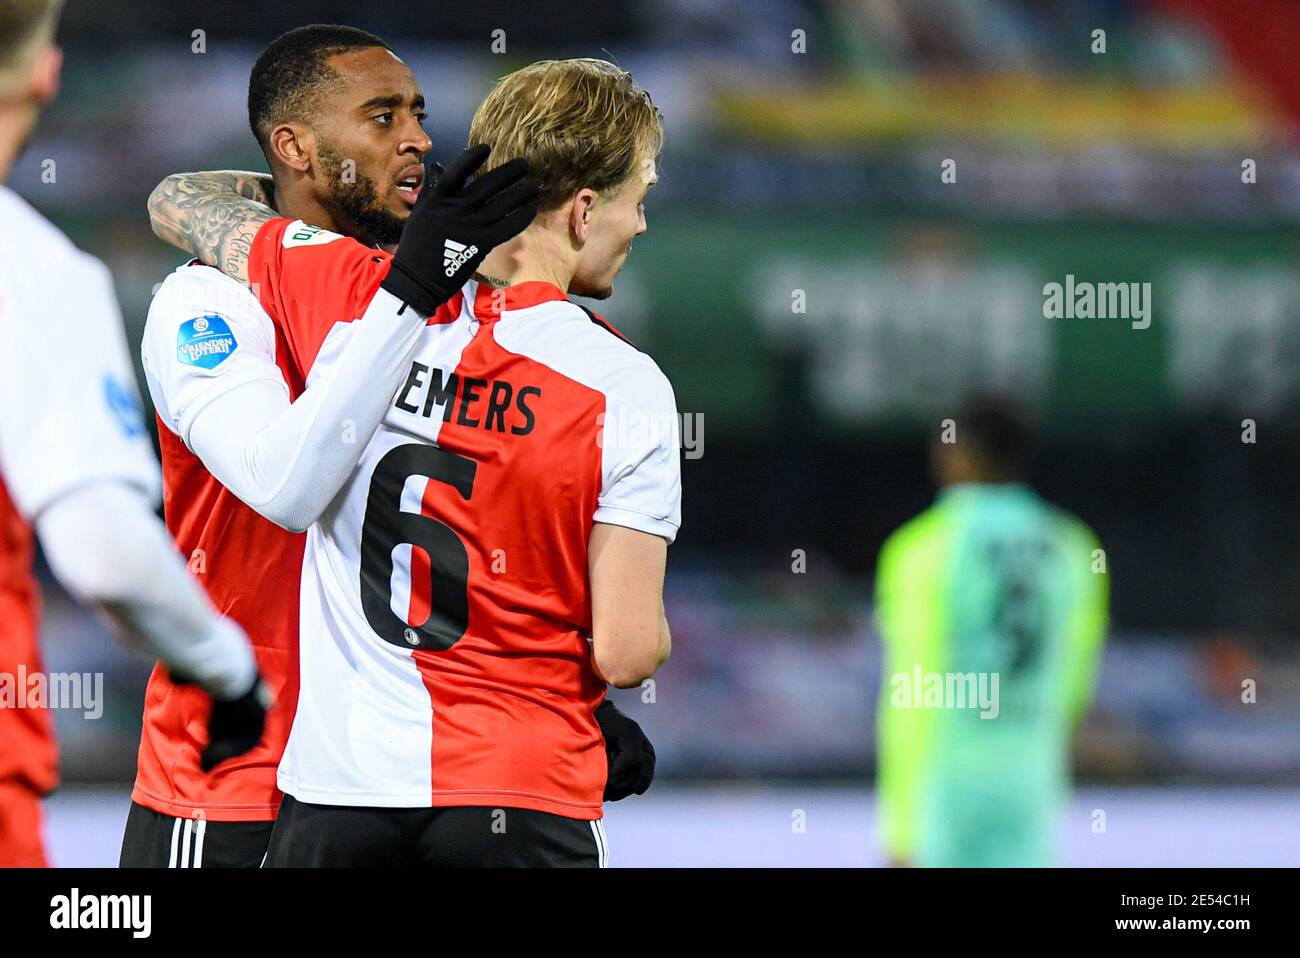 ROTTERDAM, NETHERLANDS - JANUARY 24: Mark Diemers of Feyenoord celebrating the second goal with teammates during the Dutch Eredivisie match between Fe Stock Photo